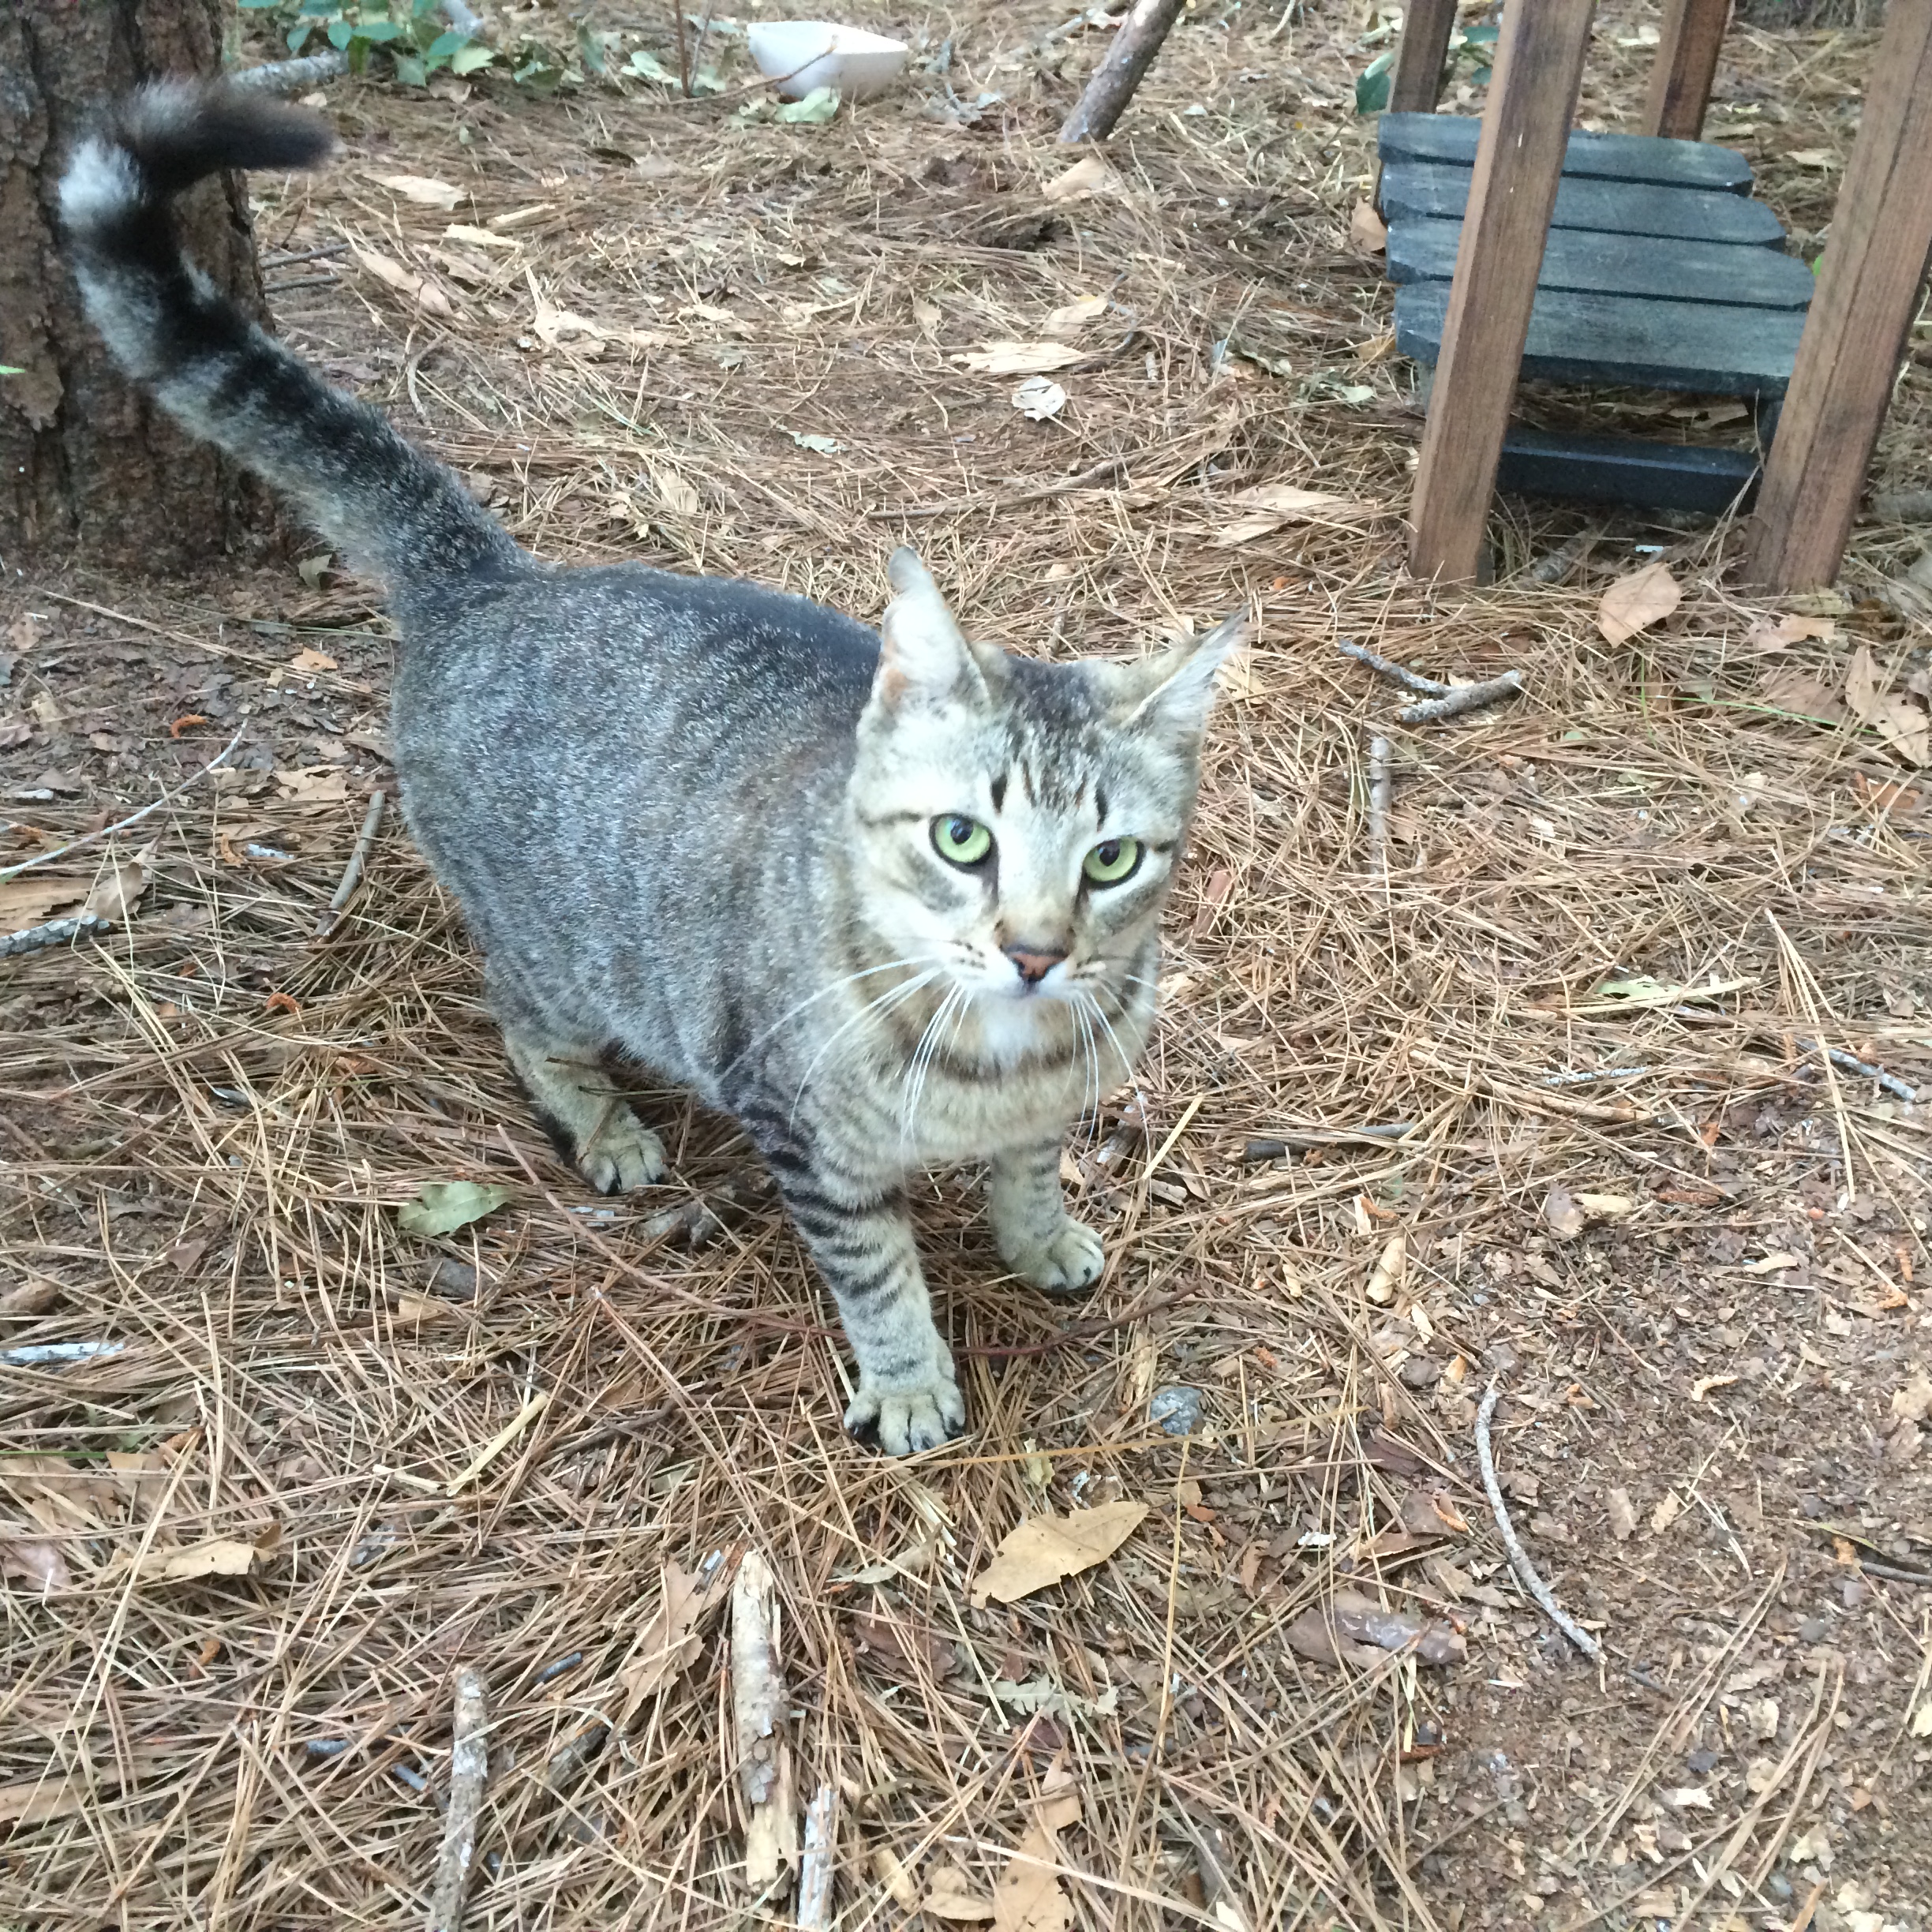 Residents care for Bluffton s forgotten cats  Palmetto 